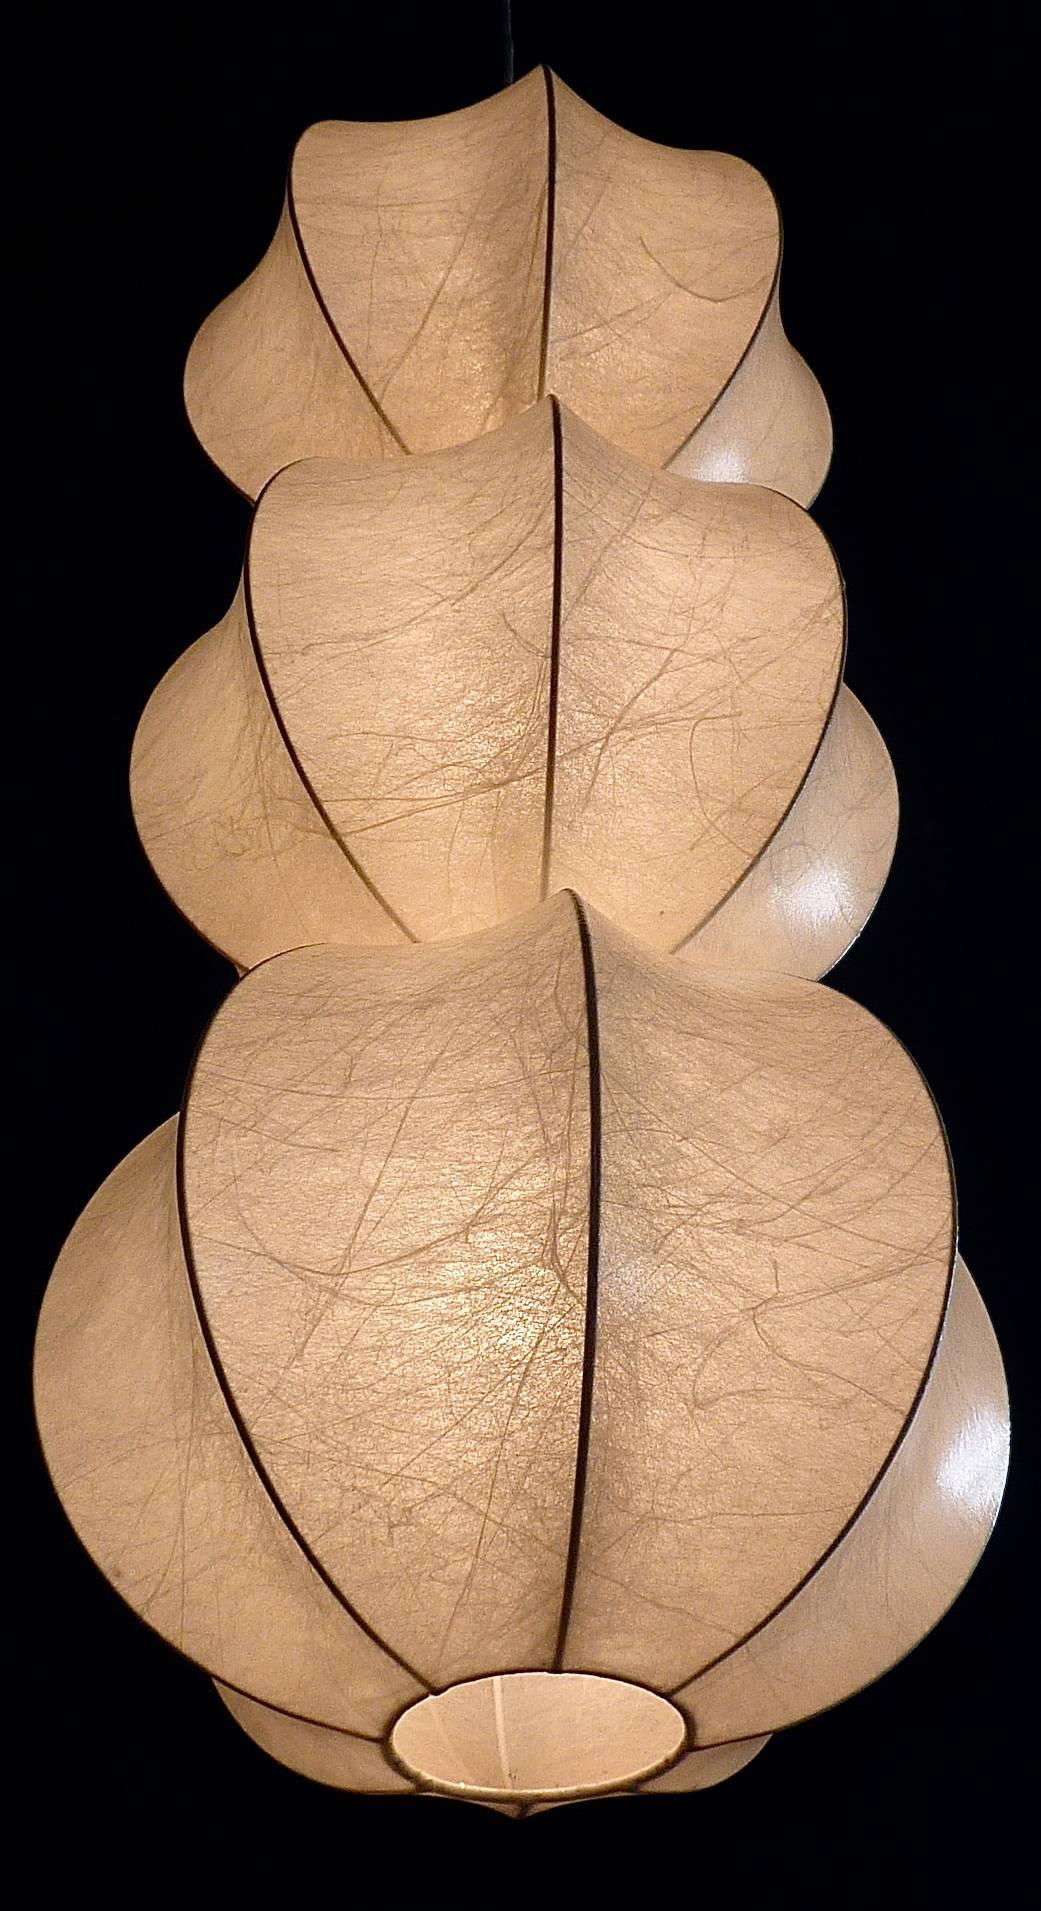 Rare and stunning Mid-Century large triple cocoon light weight pendant lamp circa 1955, possibly designed by Castiglioni for Flos, Italy. The body of one cocoon is approx. 30 cm / 11.81 inches tall, so all together about 90 cm / 35.43 inches. It has